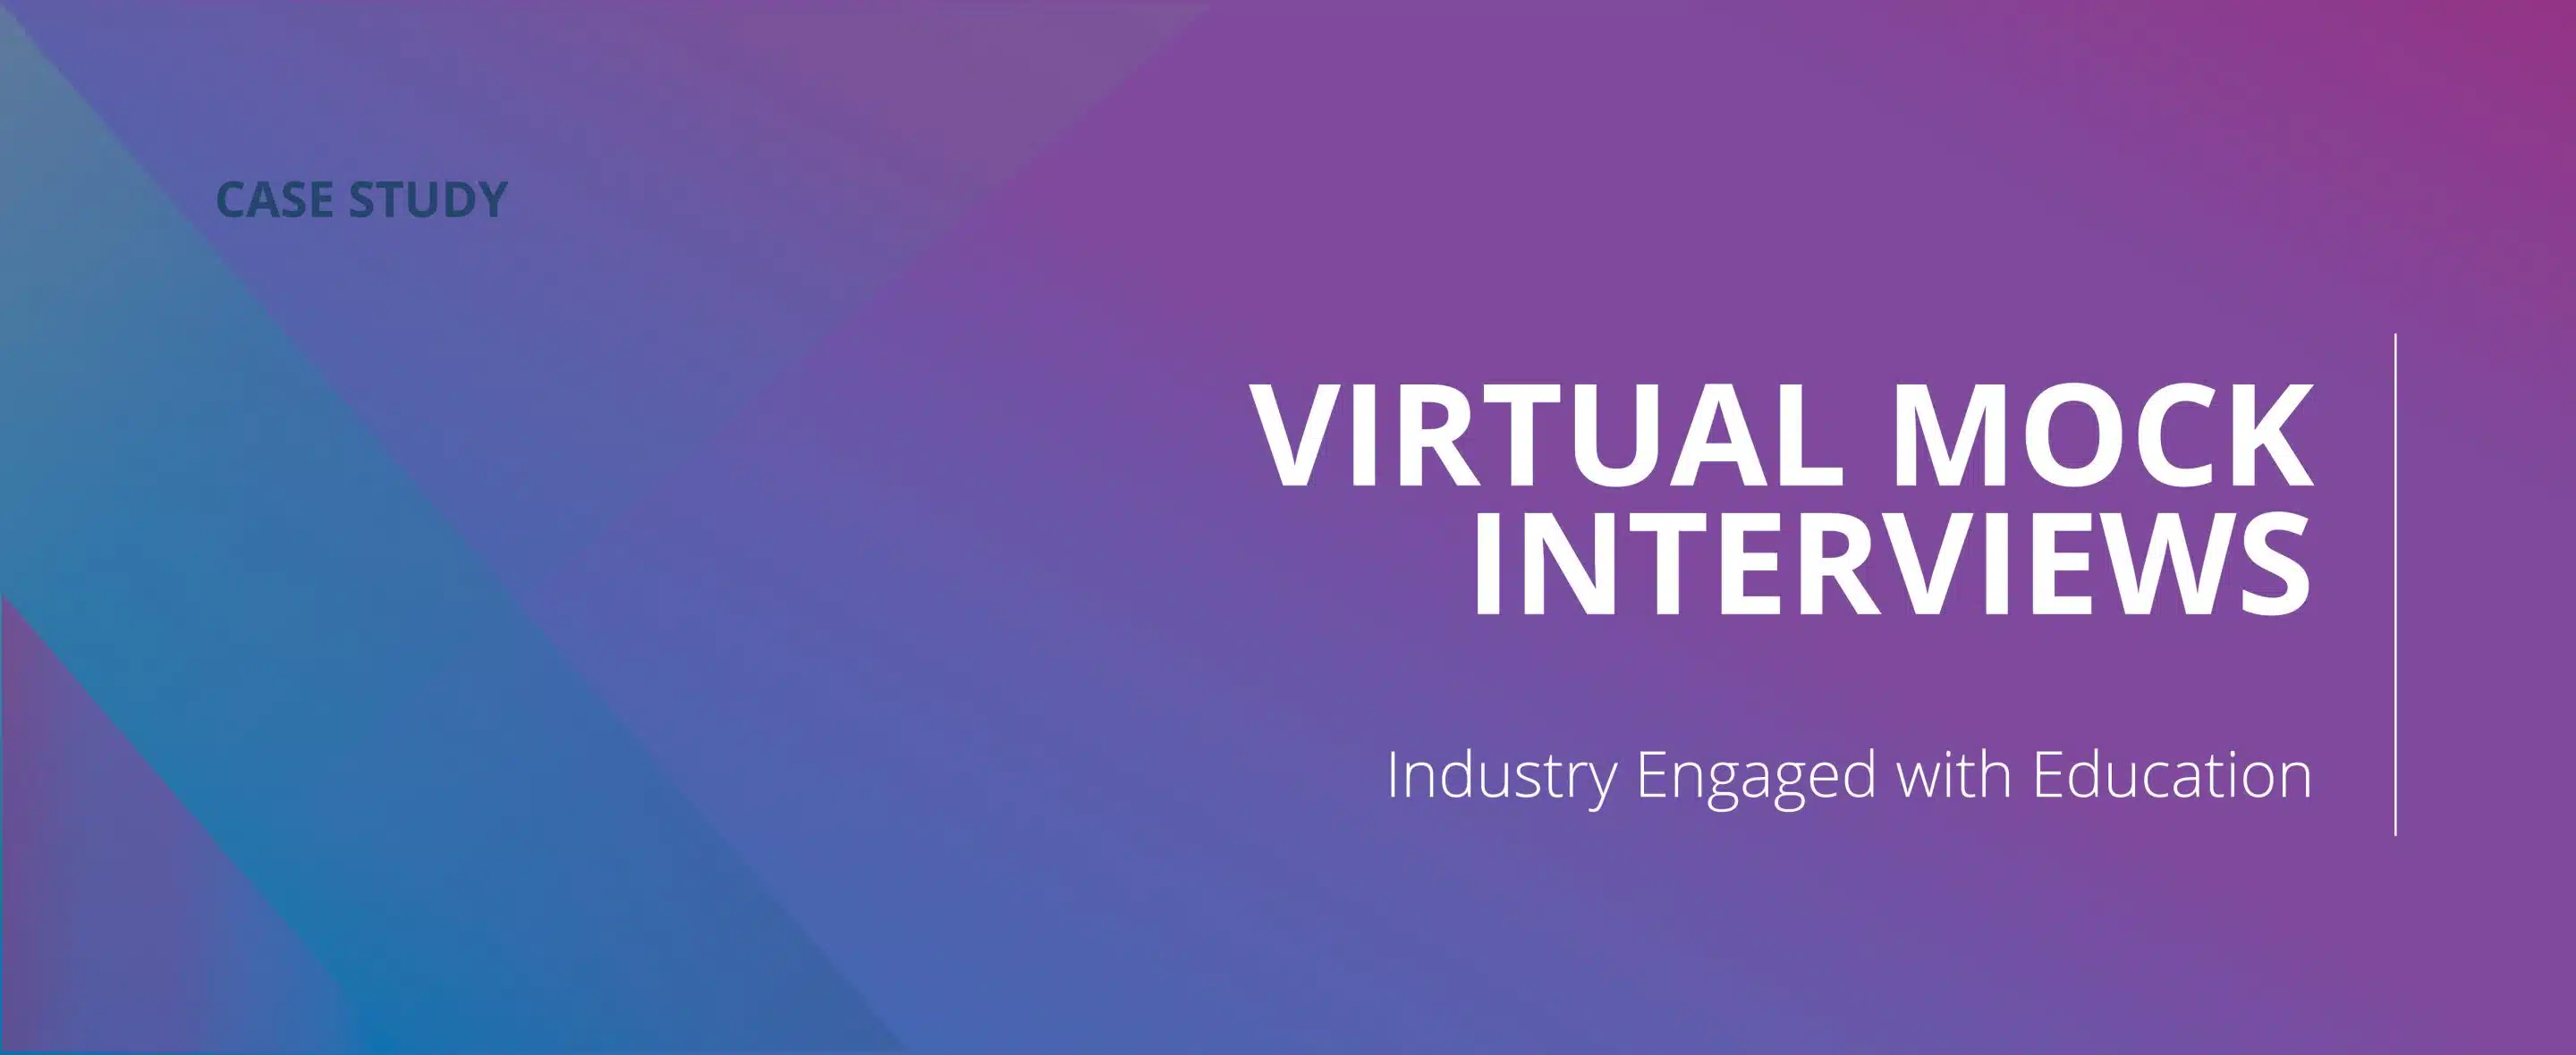 Virtual Mock Interviews – Industry Engaged With Education